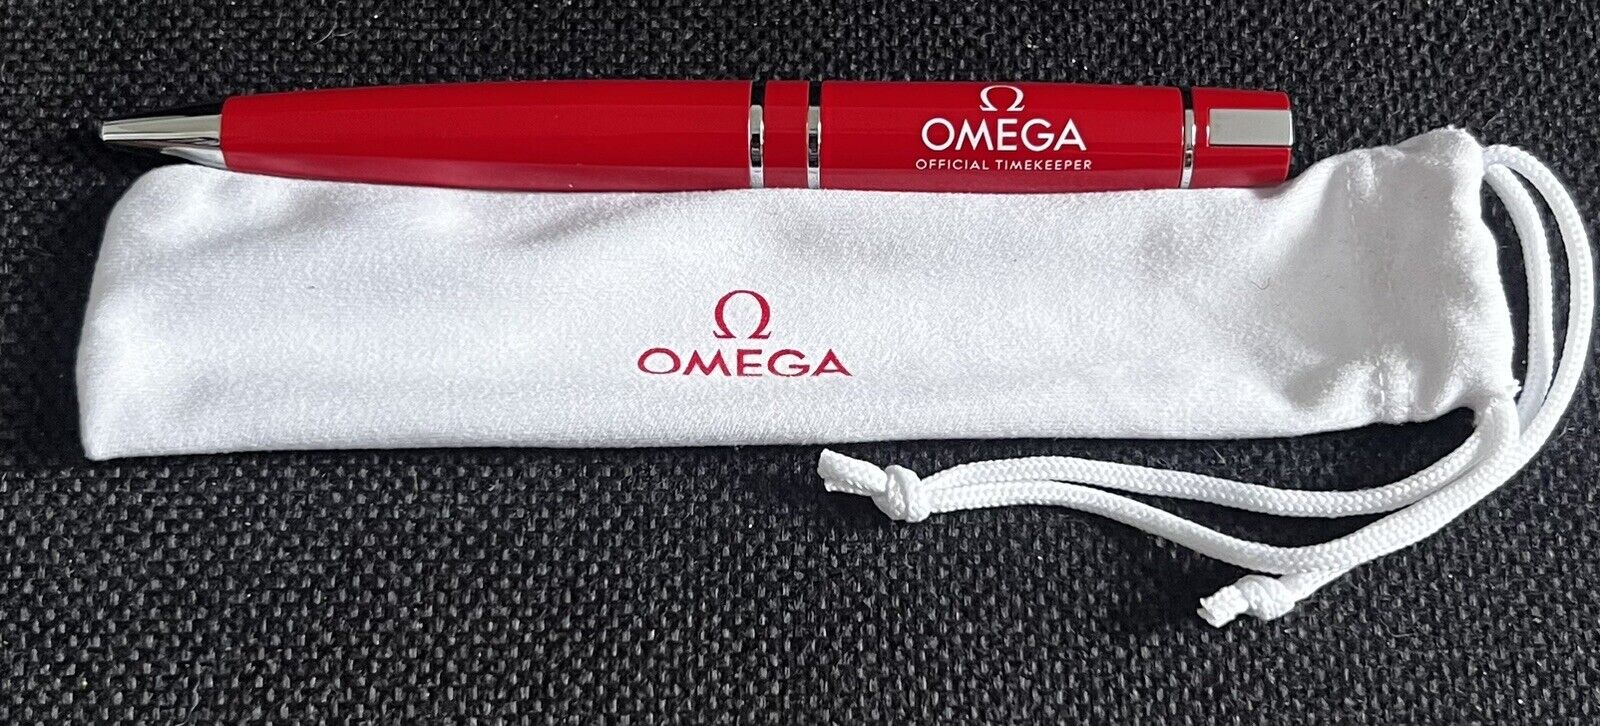 Authentic OMEGA Olympic Novelty Red/Silver Twisted Ballpoint Pen w/ Cloth - RARE